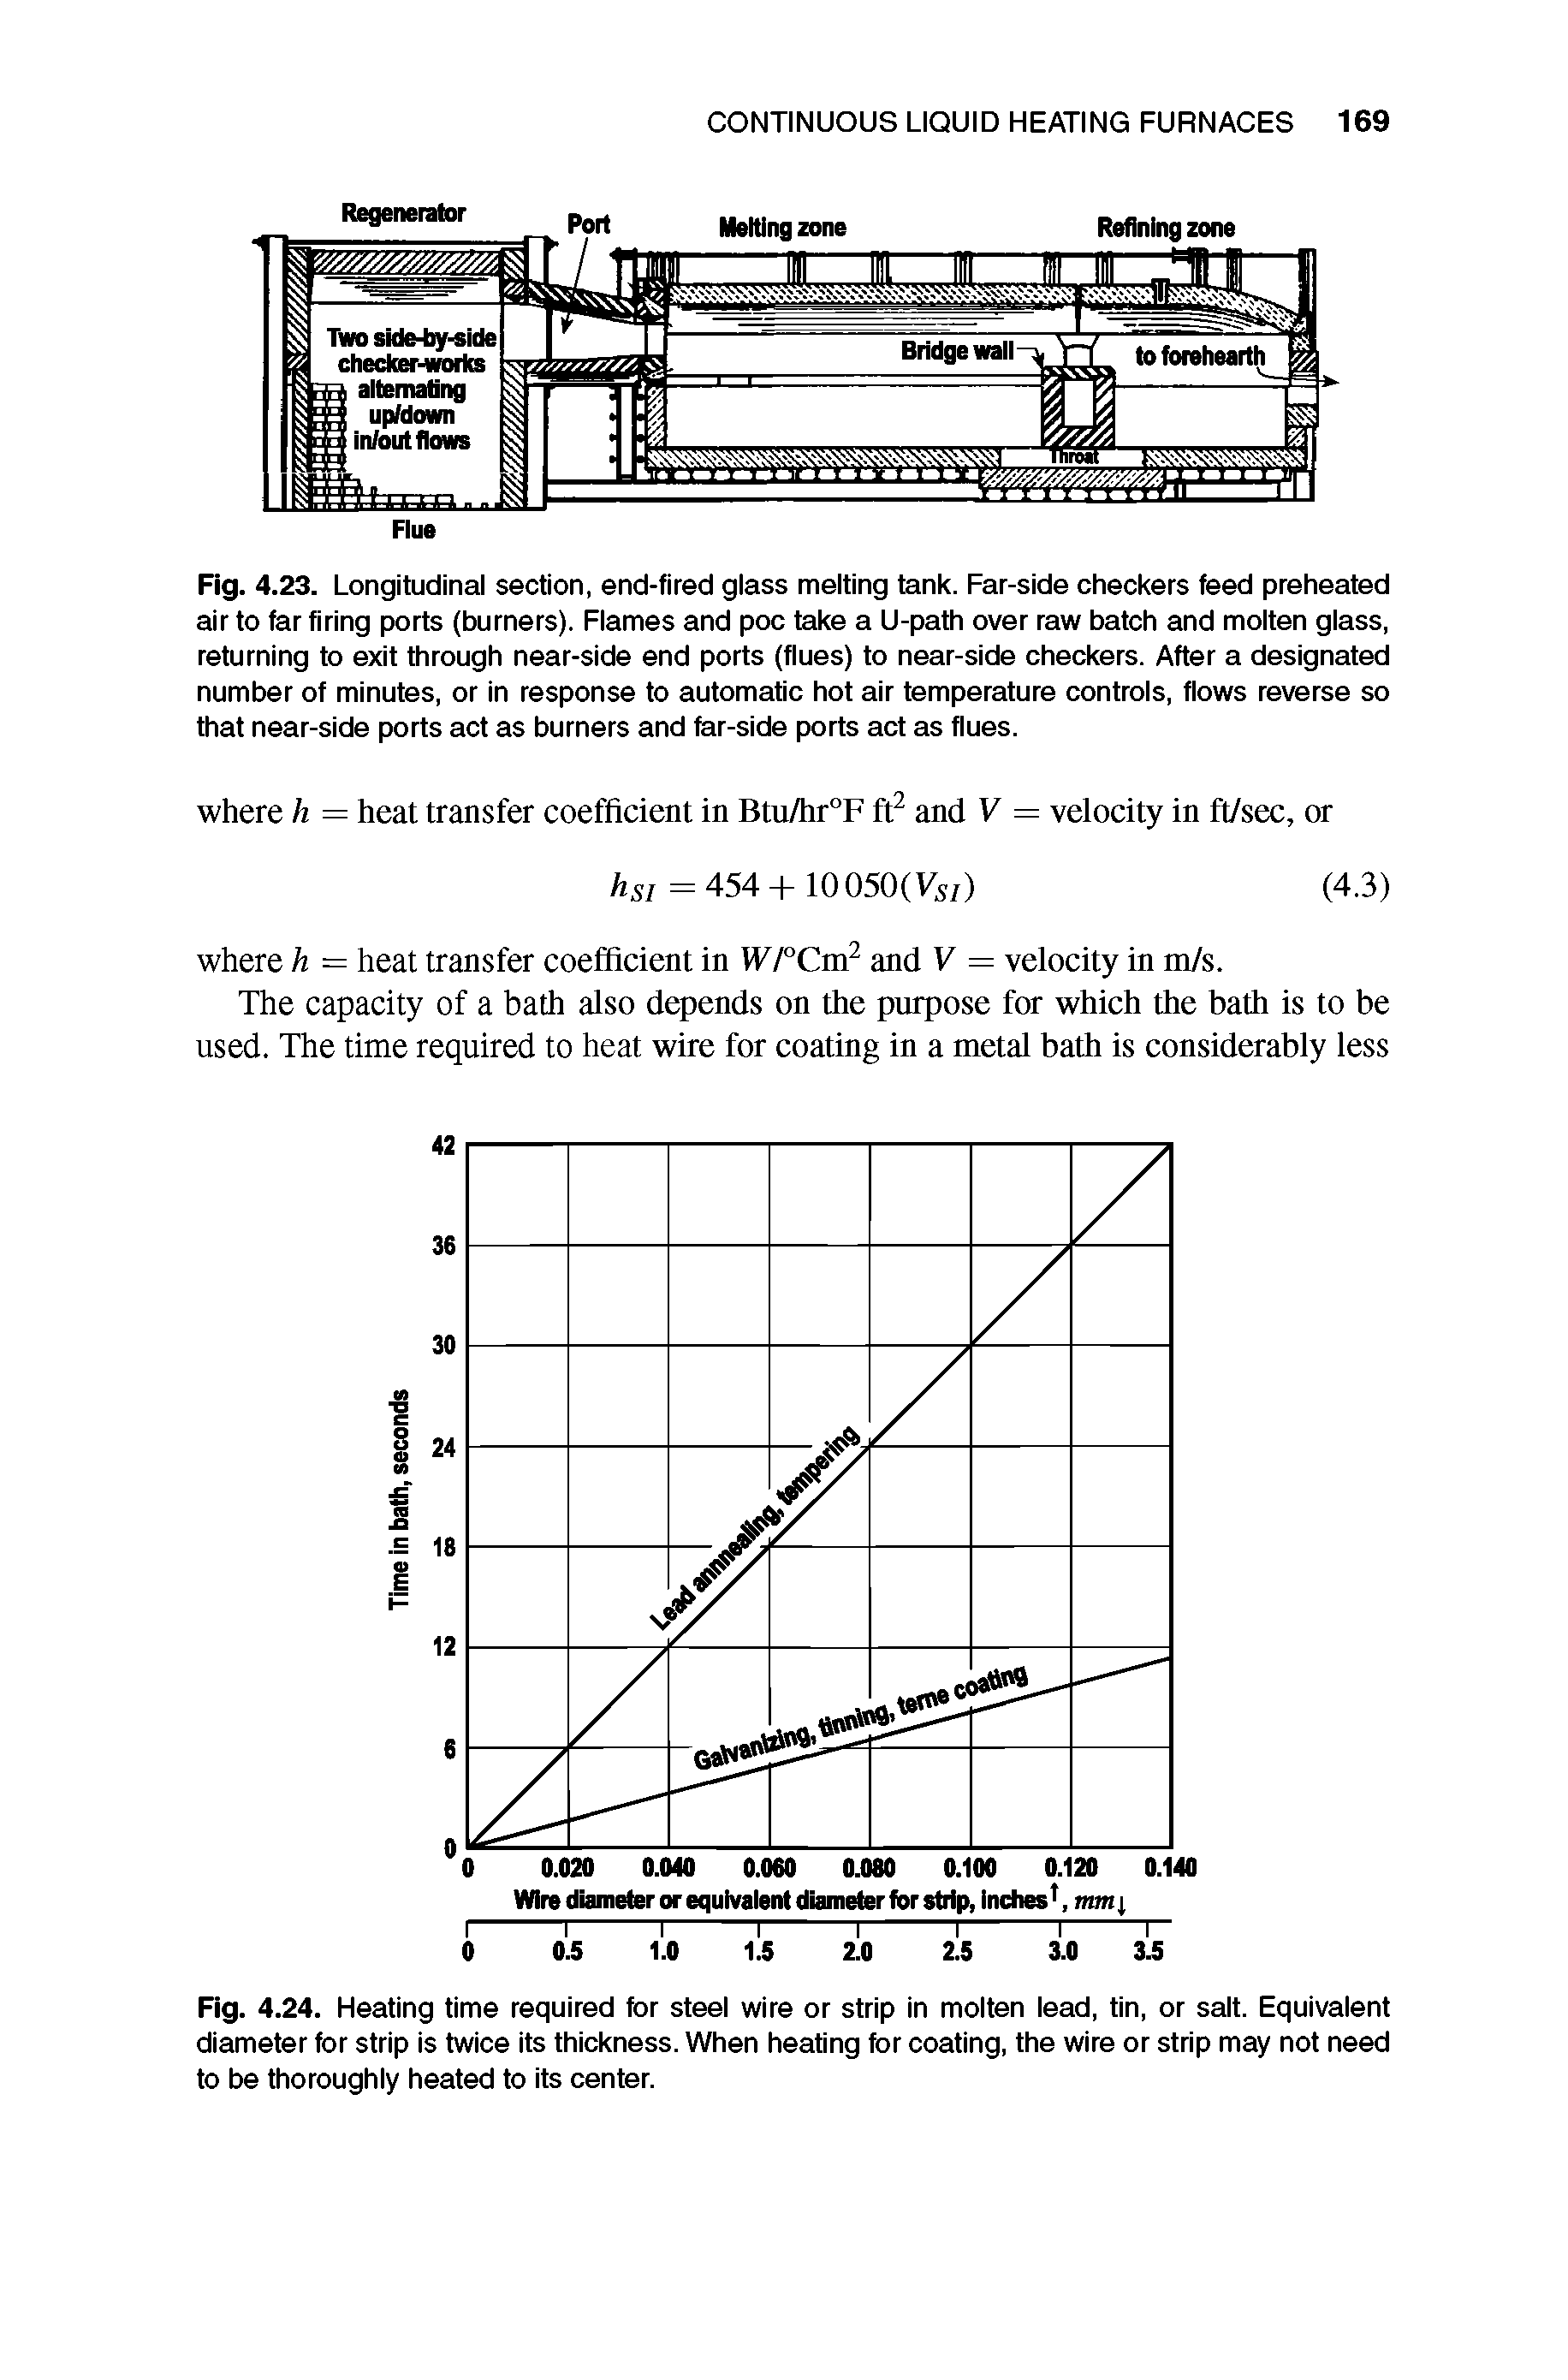 Fig. 4.24. Heating time required for steel wire or strip in molten lead, tin, or salt. Equivalent diameter for strip is twice its thickness. When heating for coating, the wire or strip may not need to be thoroughly heated to its center.